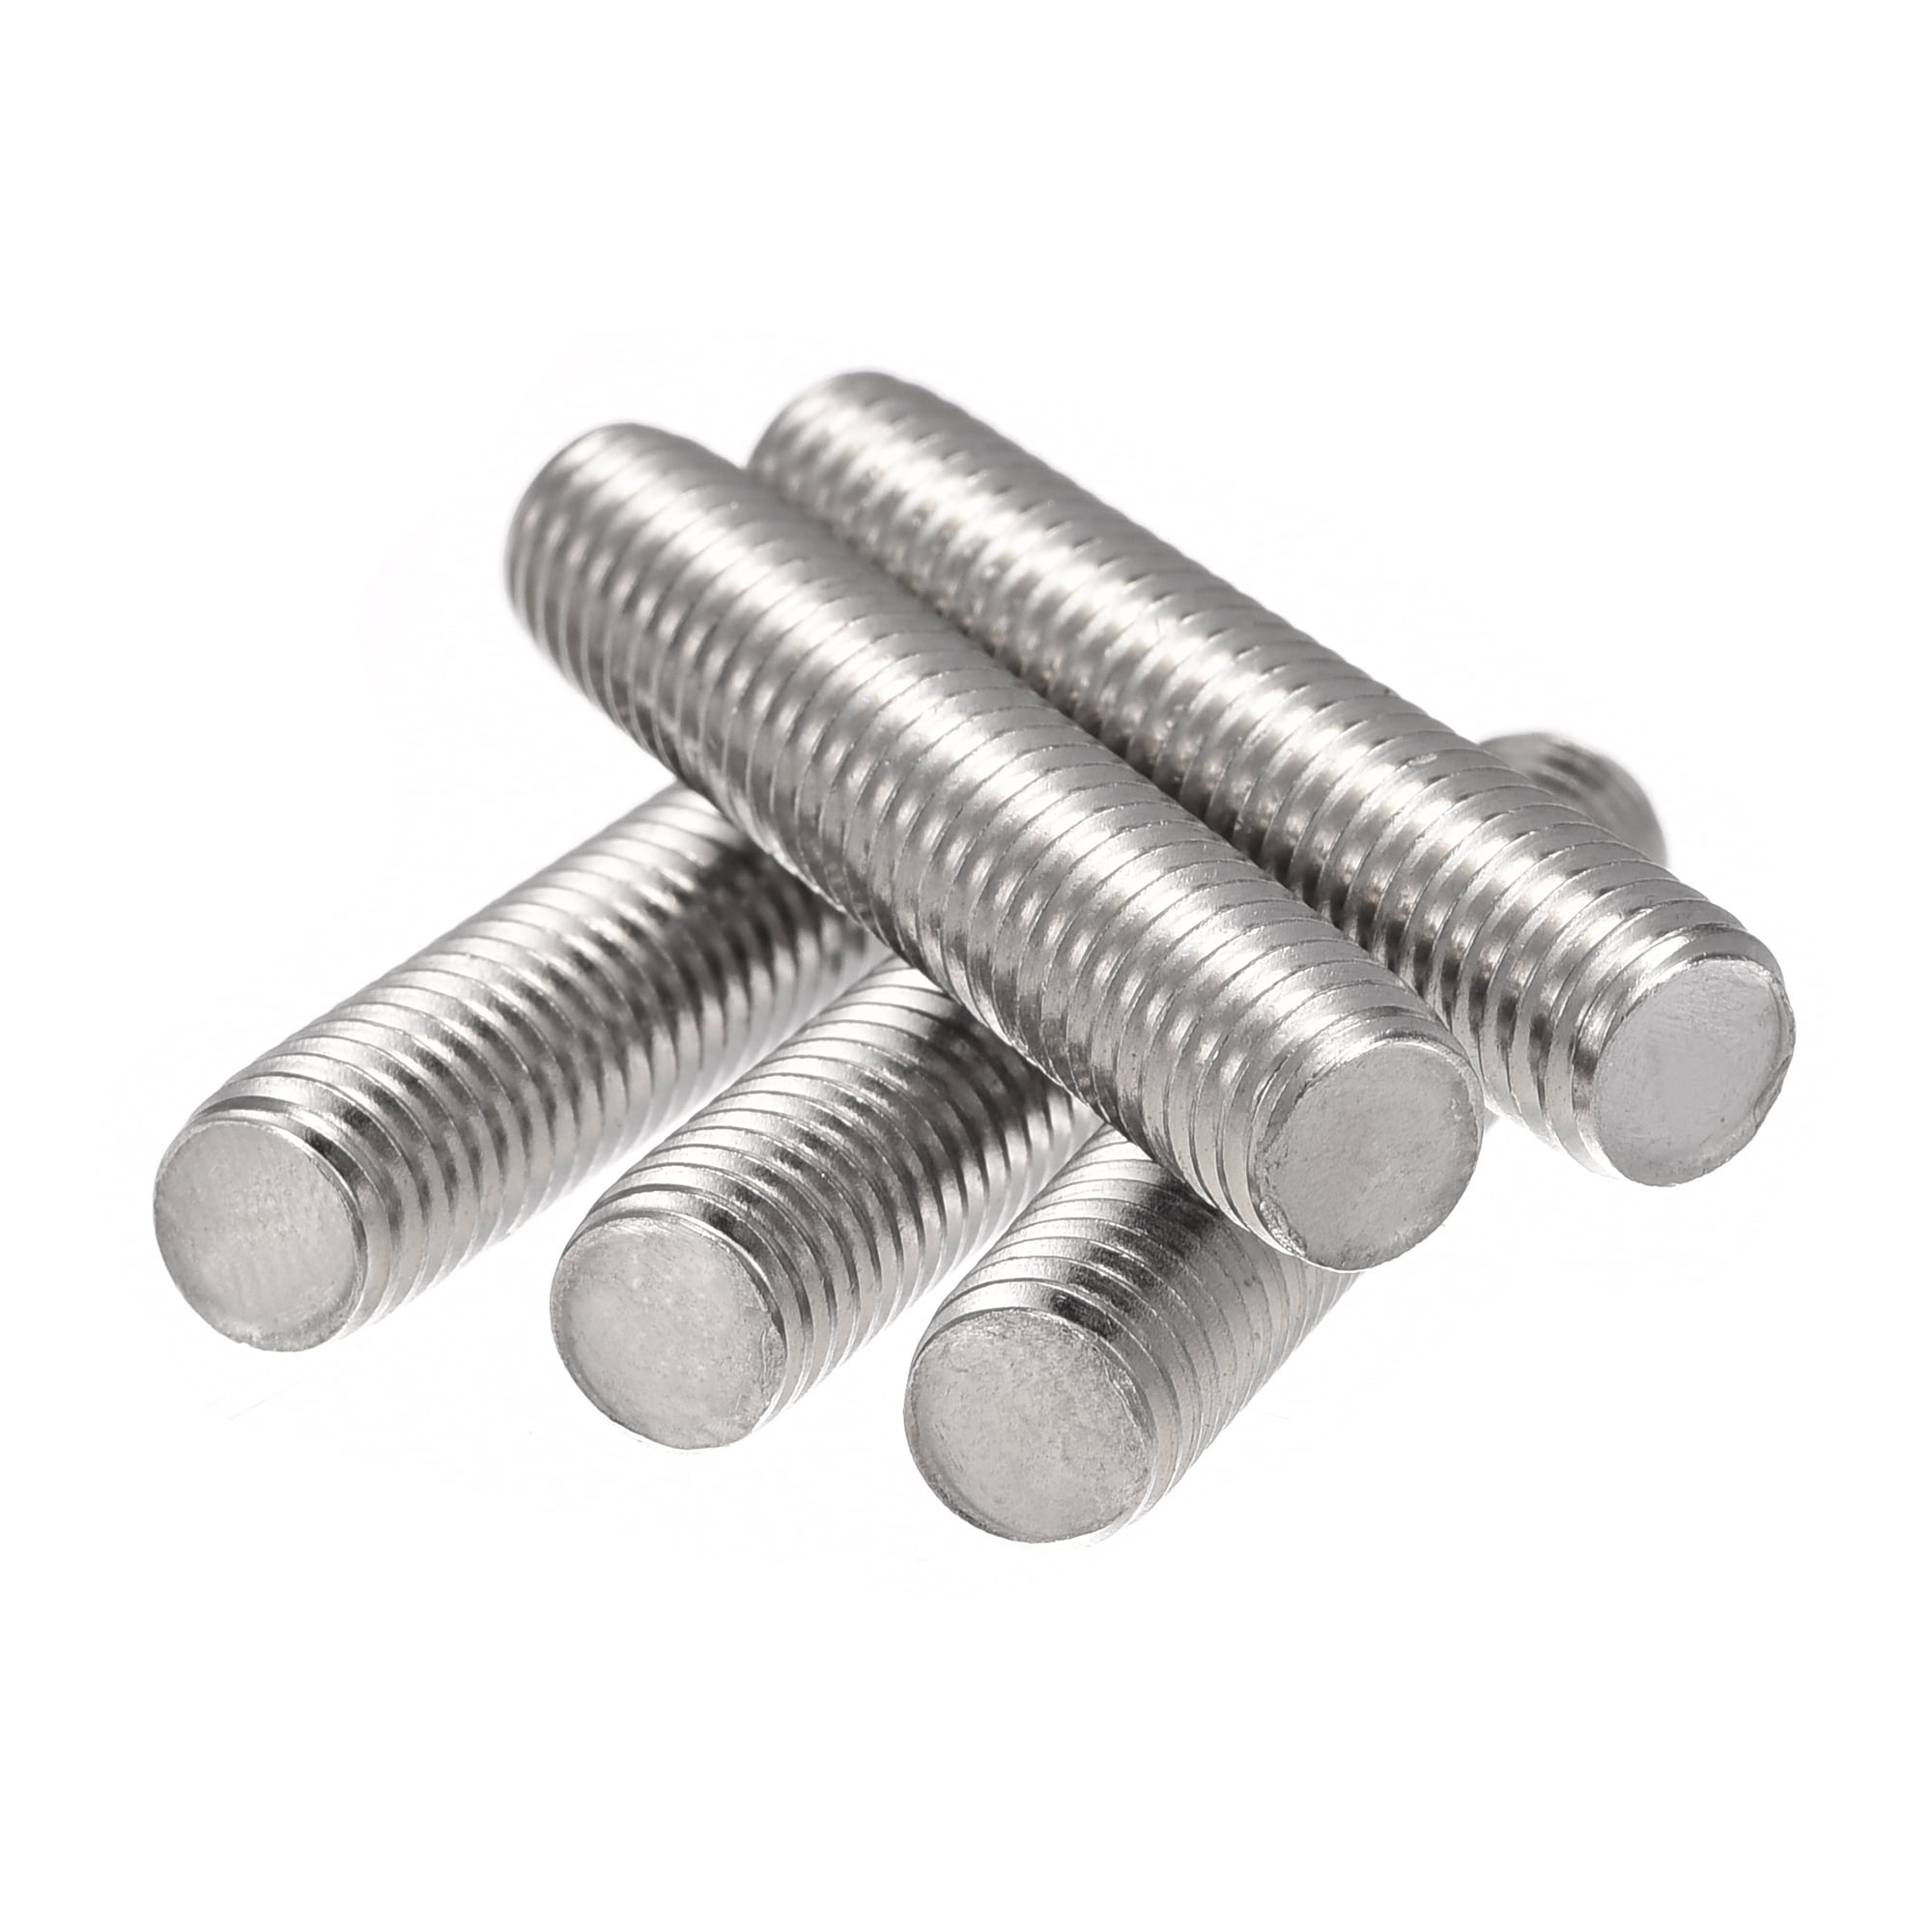 300mm Length A2 STAINLESS THREADED BAR NUTS & WASHERS M3 M4 M5 M6 M8 M10 M12 